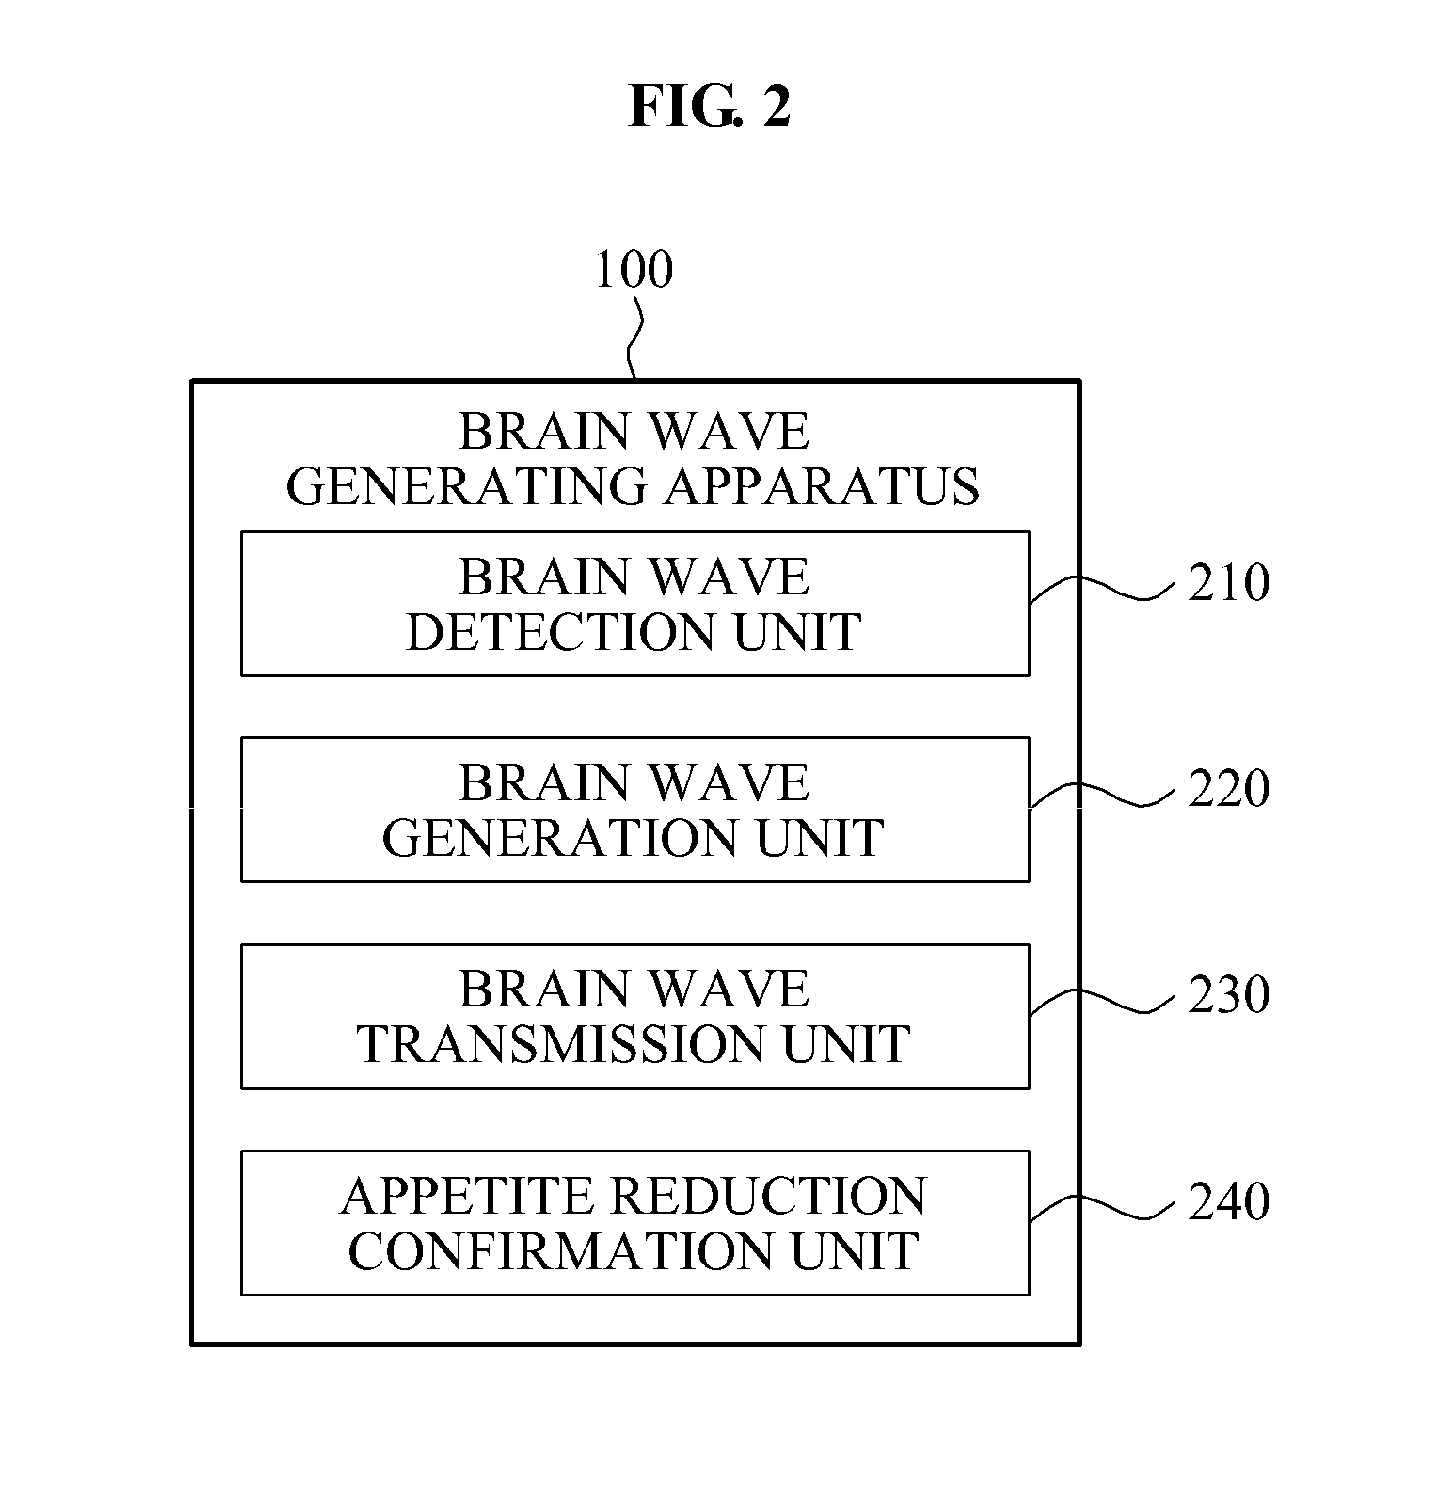 Apparatus and method for generating brain waves for suppressing appetite while dieting